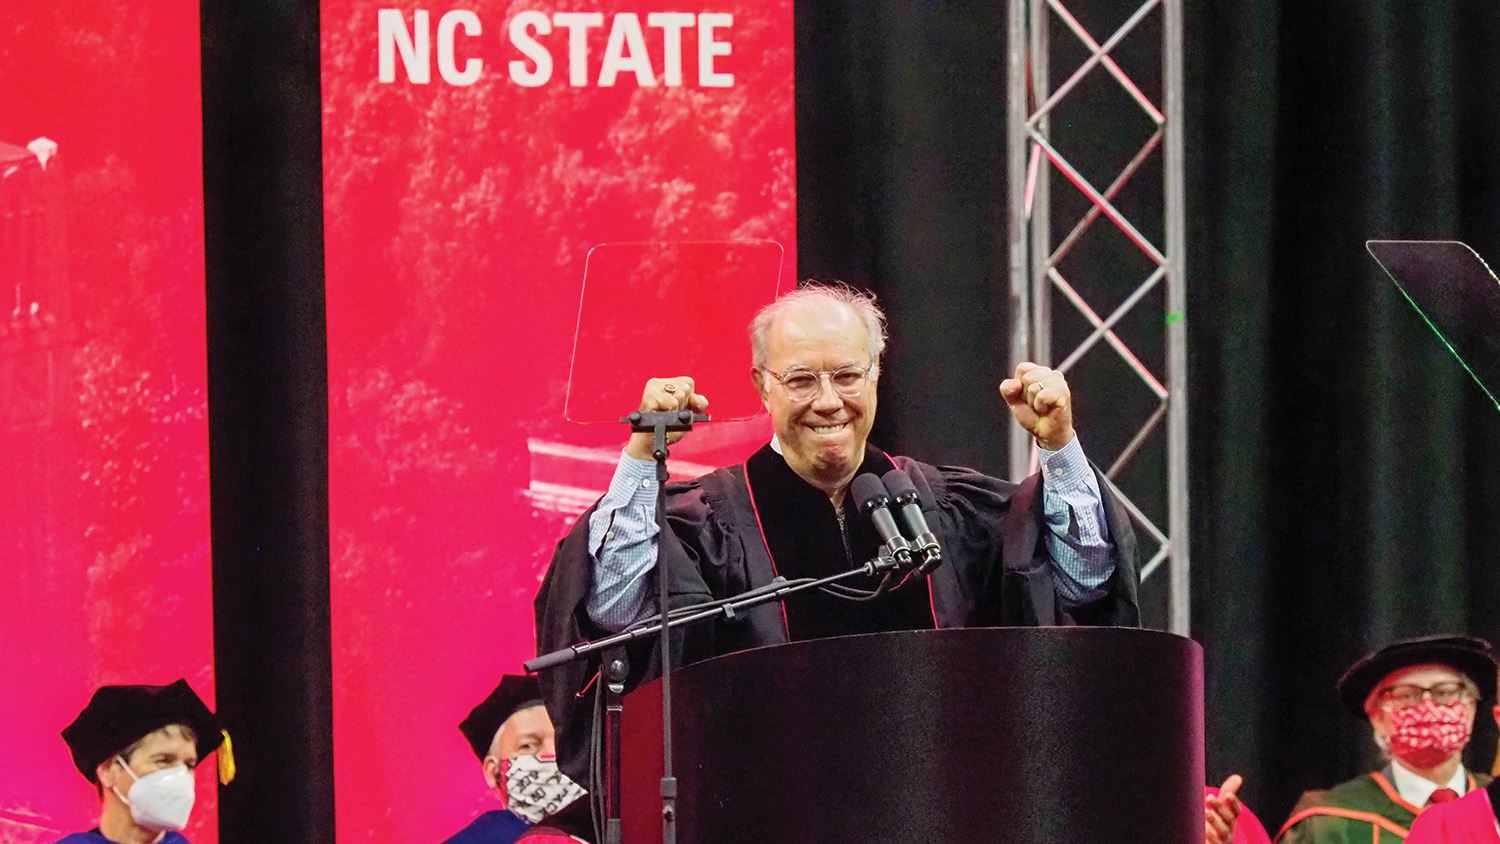 Mark Templeton speaking at the Fall 2021 NC State Commencement Ceremony